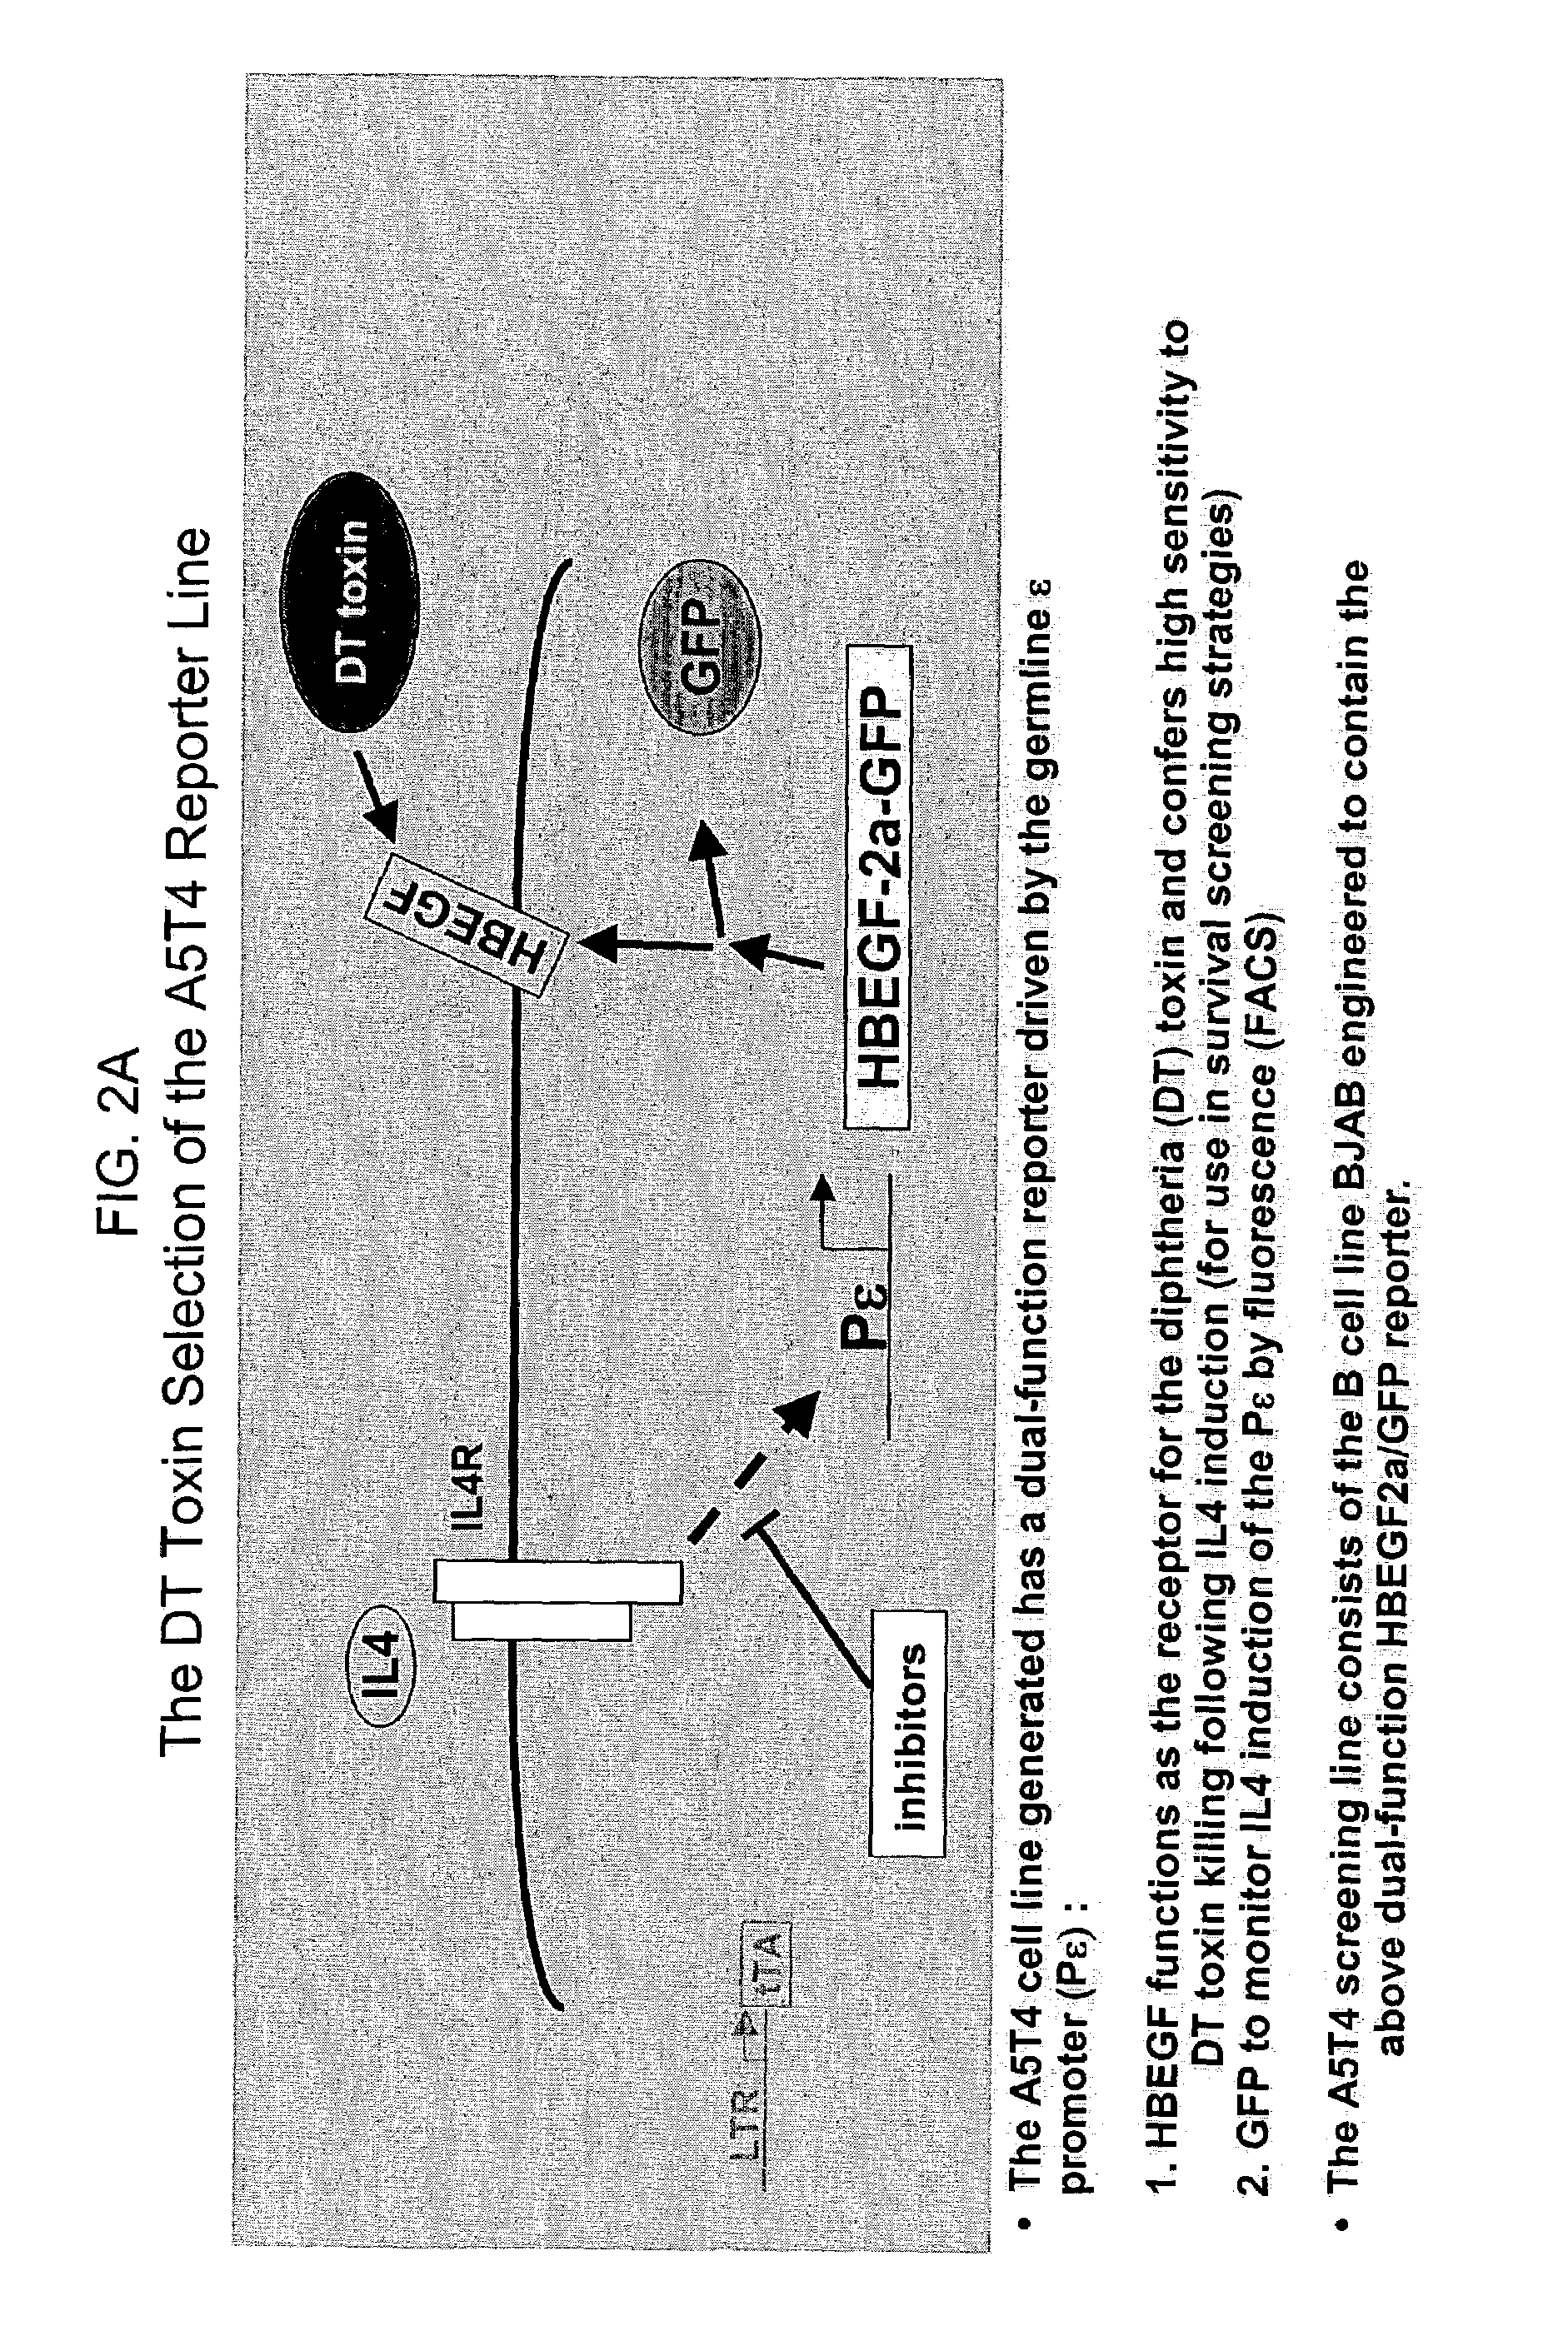 Methods of identifying compounds that modulate IL-4 receptor-mediated IgE synthesis utilizing a thioredoxin-like 32 kDa protein